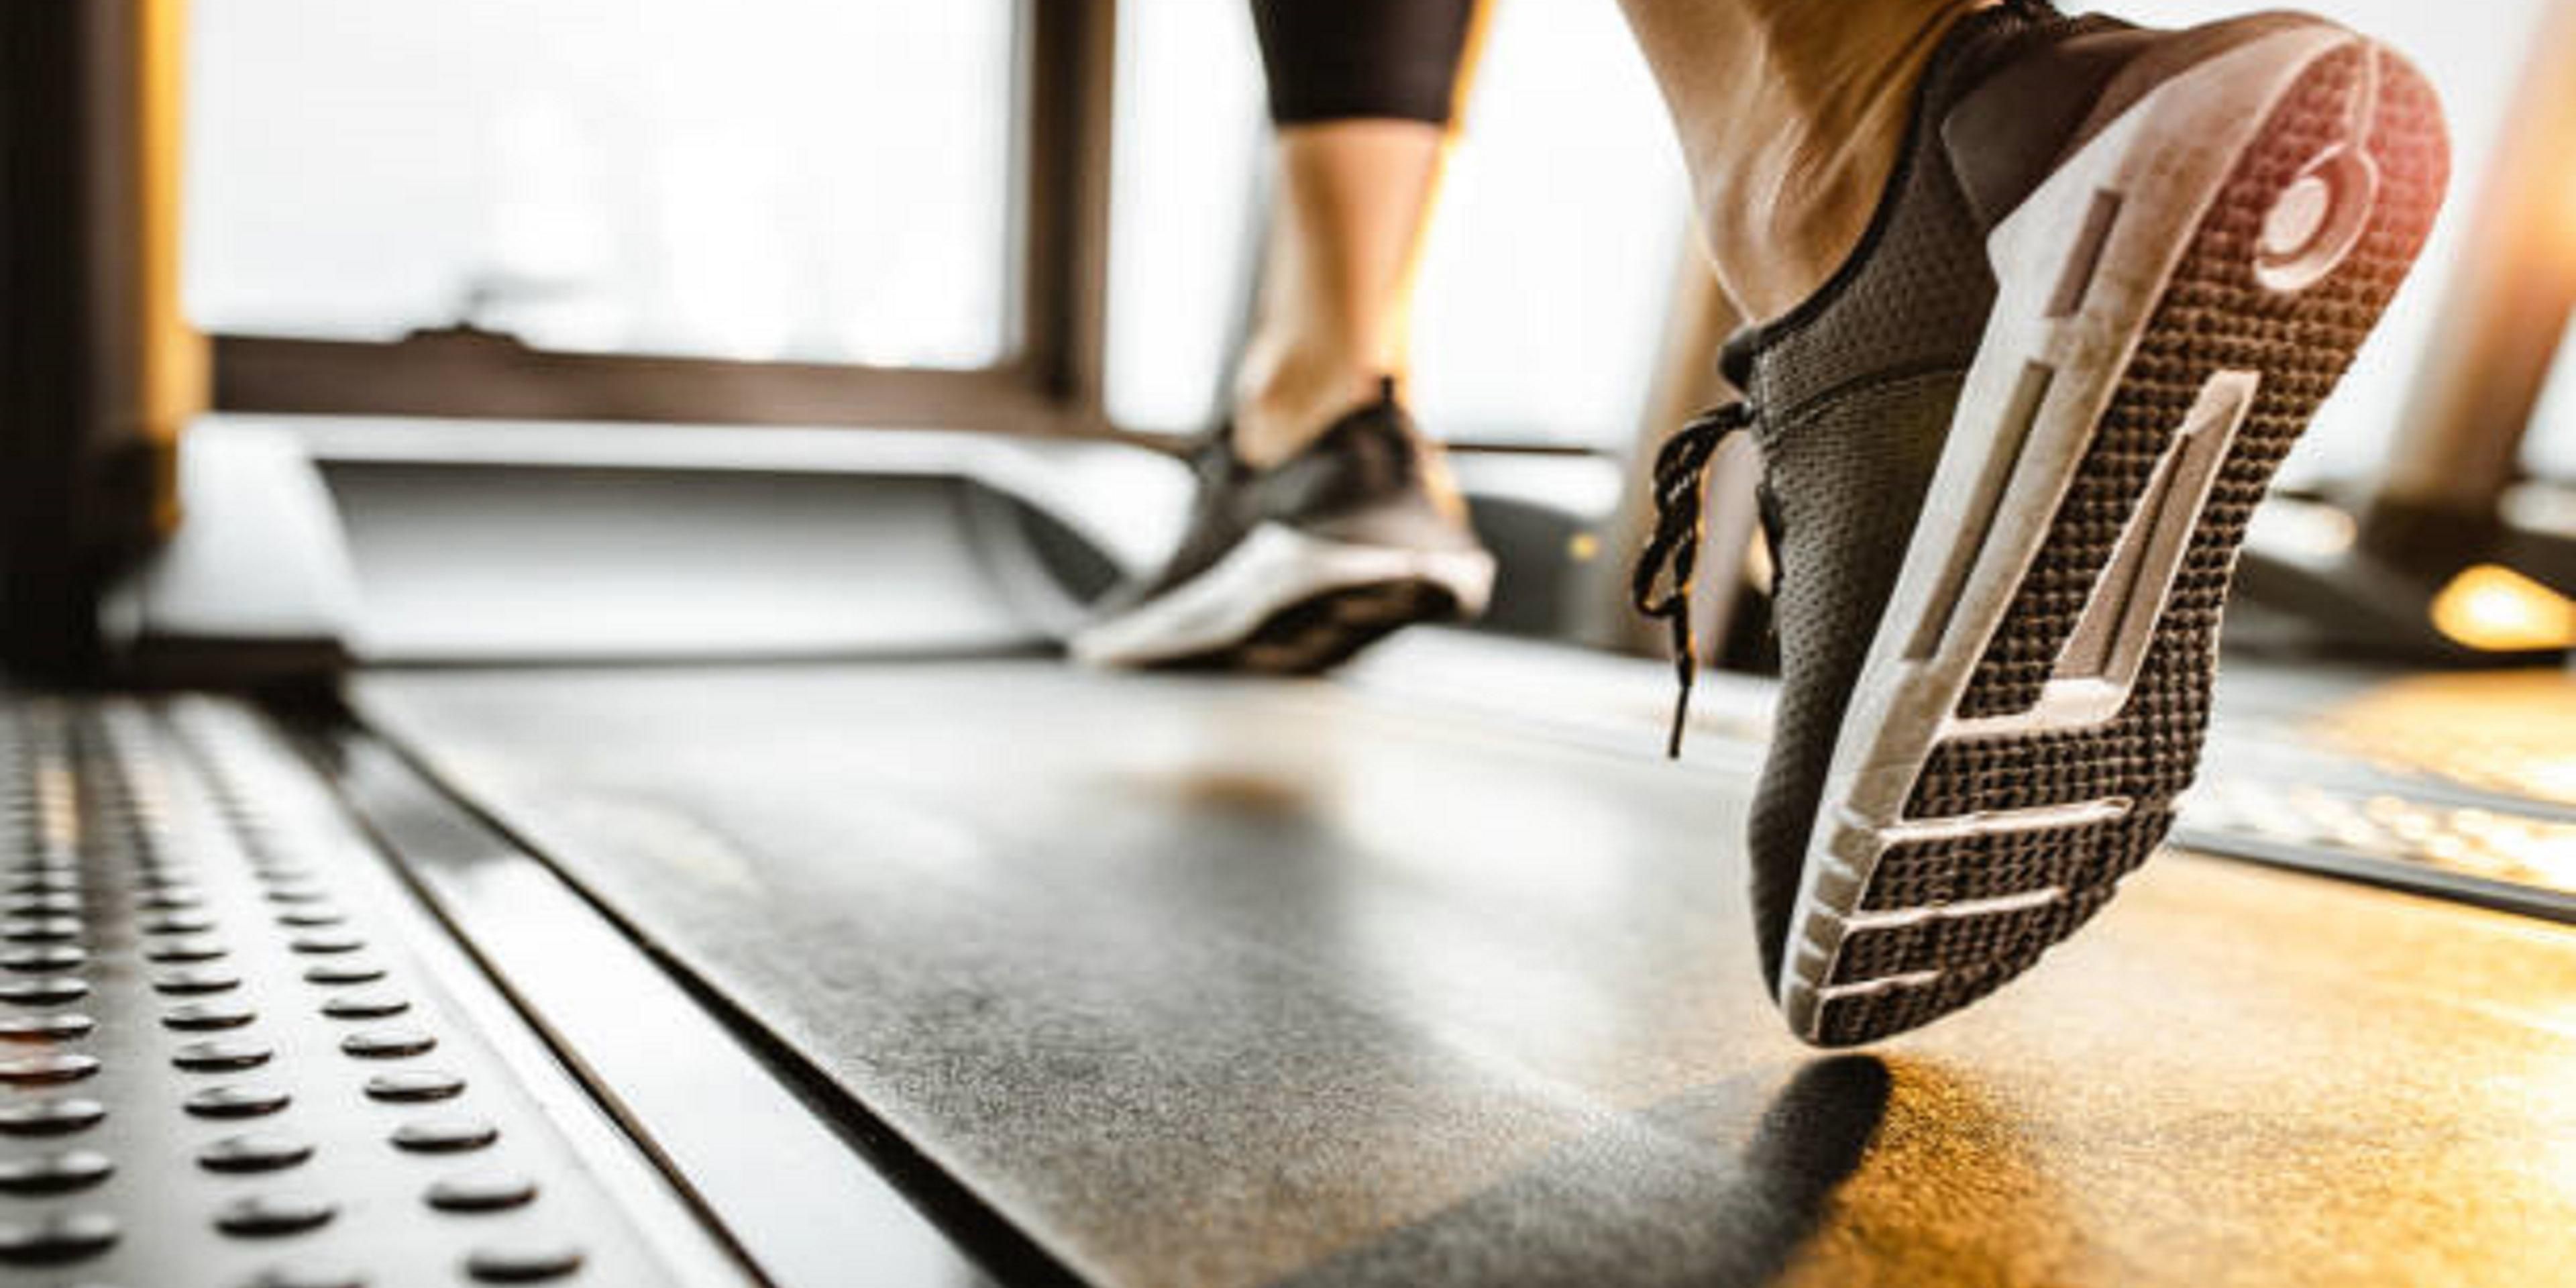 Get your sweat on in our complimentary, fully equipped fitness center with treadmill, stationary bike, elliptical, weights and complimentary towels, open 24 hours.